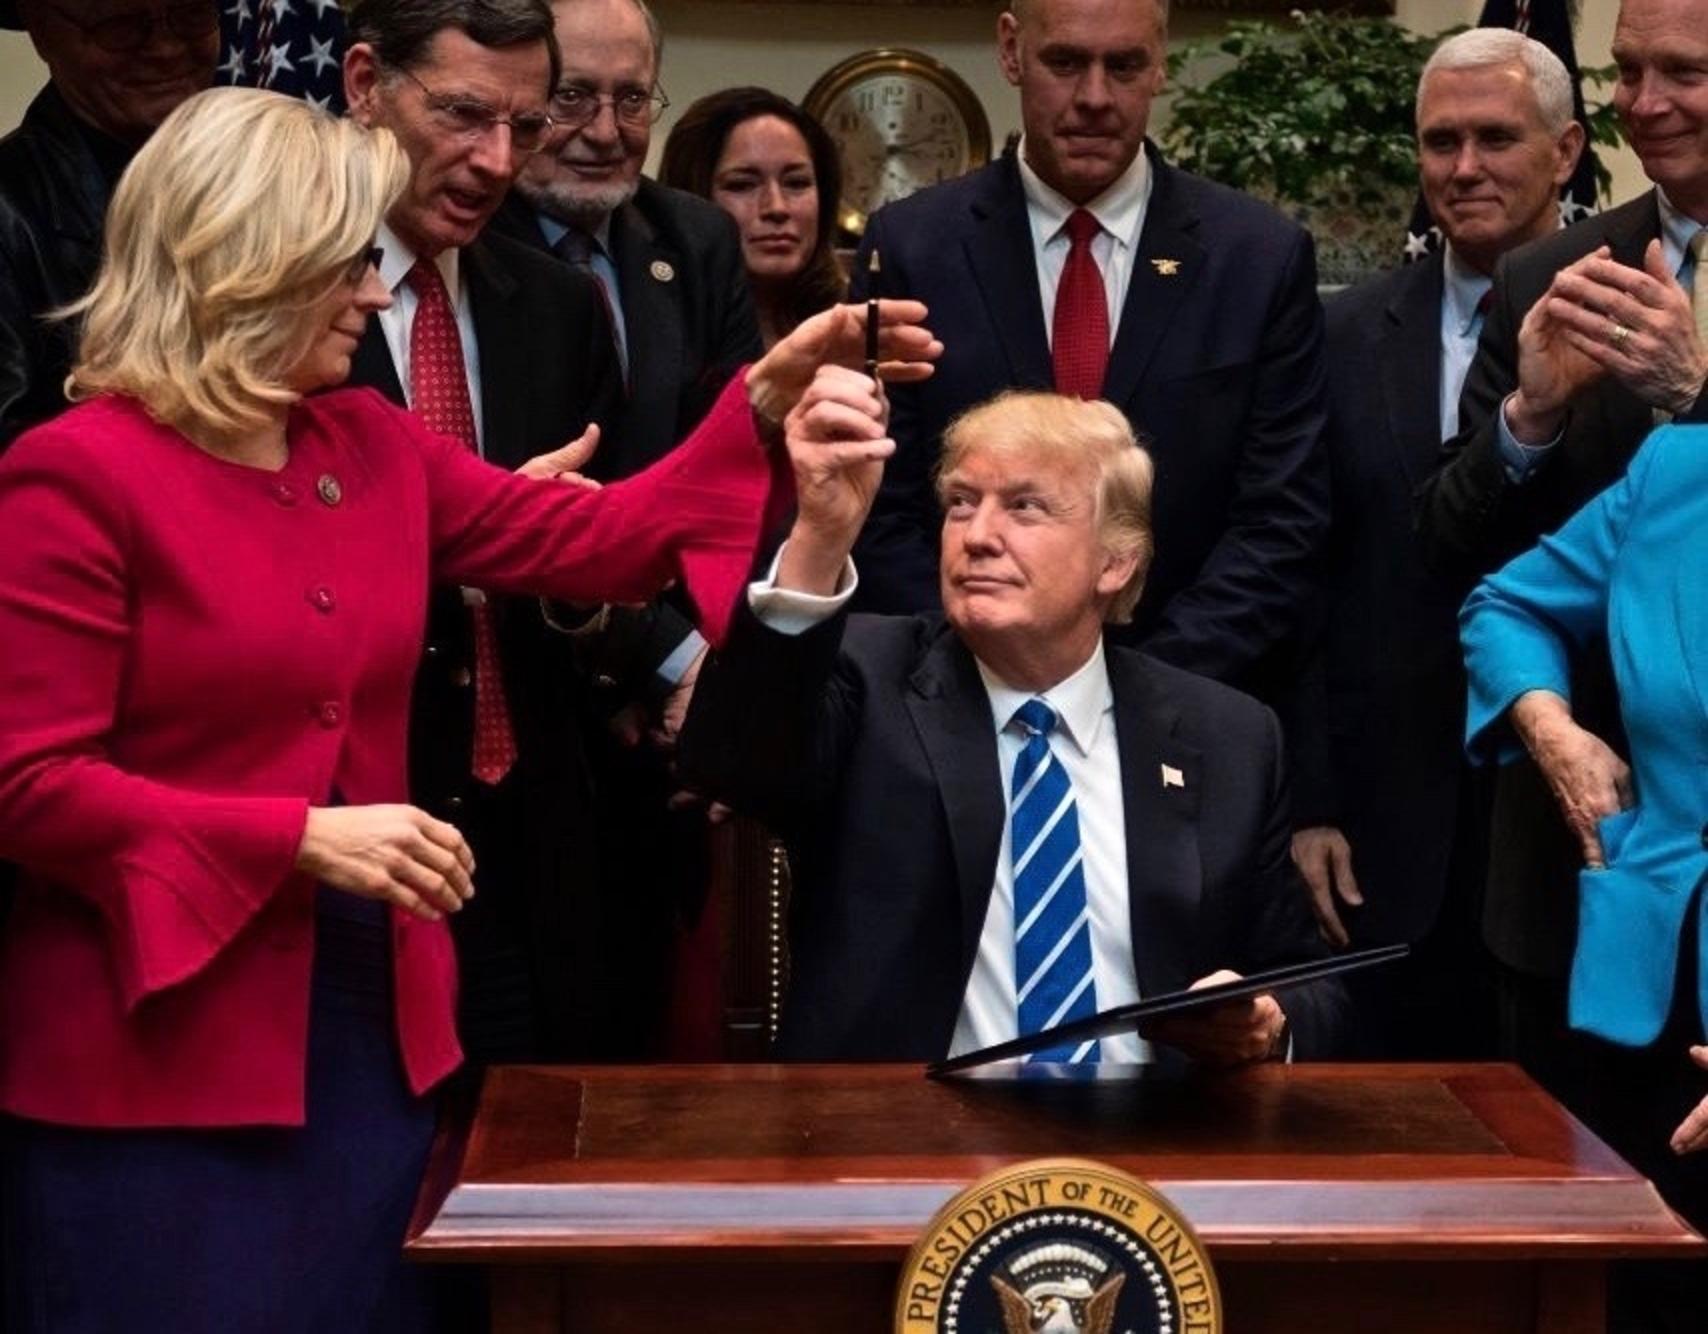 President Trump gave Congresswoman Liz Cheney a pen after he signed an executive order removing regulations pertaining to coal and proclaimed that he would revive the coal industry in America. That hasn't happened—the coal market is plunging due to a glut of natural gas. Both the President and U.S. Rep. Cheney claim that human-caused climate change is based on "junk science" but they've provided no evidence, capable of withstanding scrutiny, to back it up.  Photo courtesy The White House